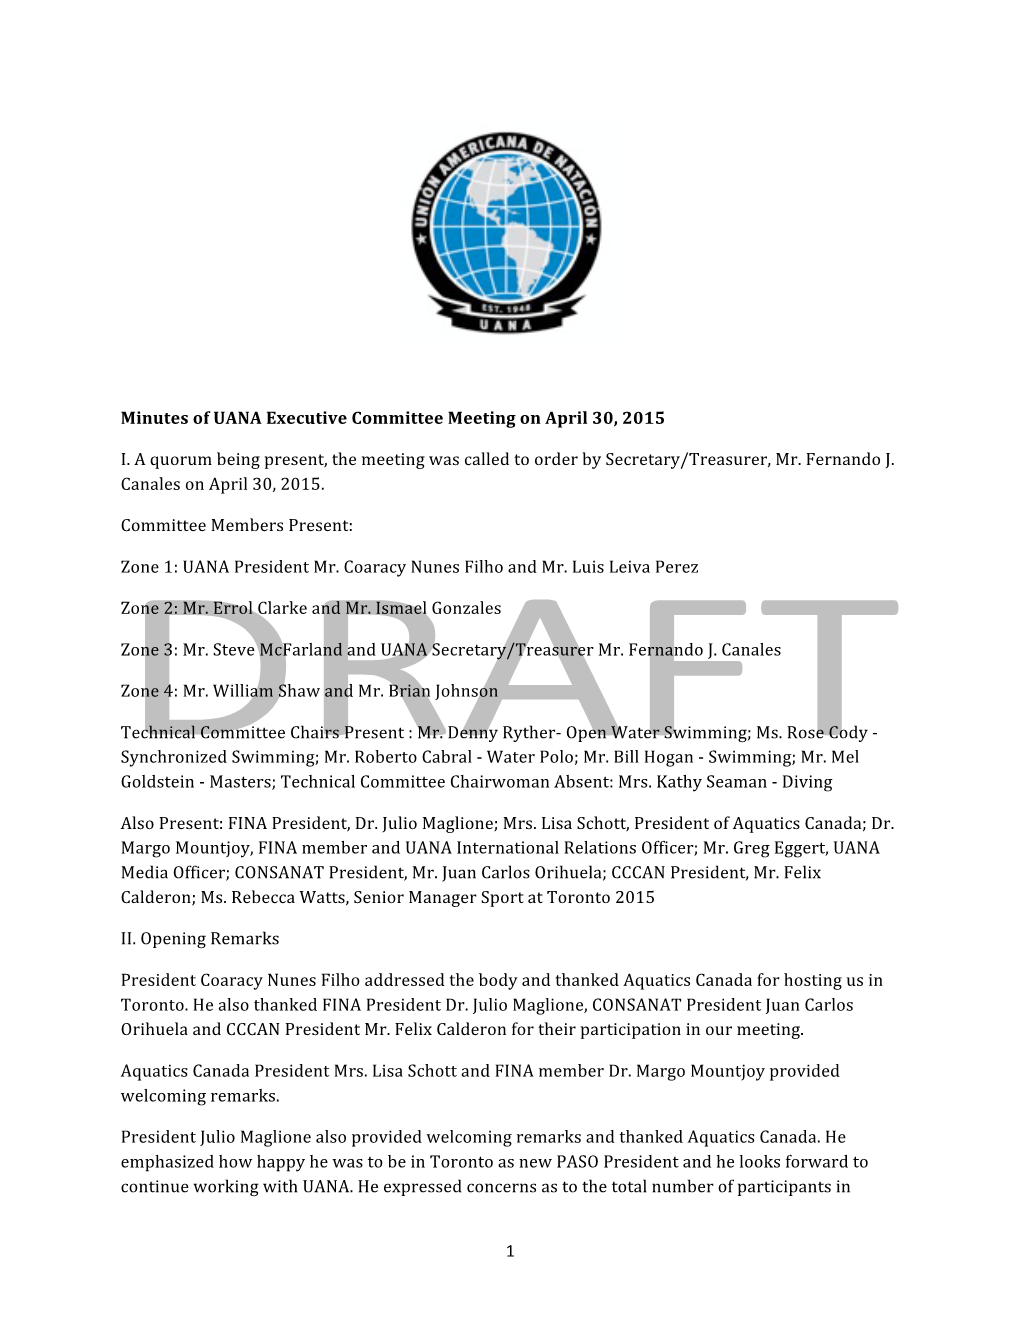 Minutes of UANA Executive Committee Meeting on April 30 of 2015